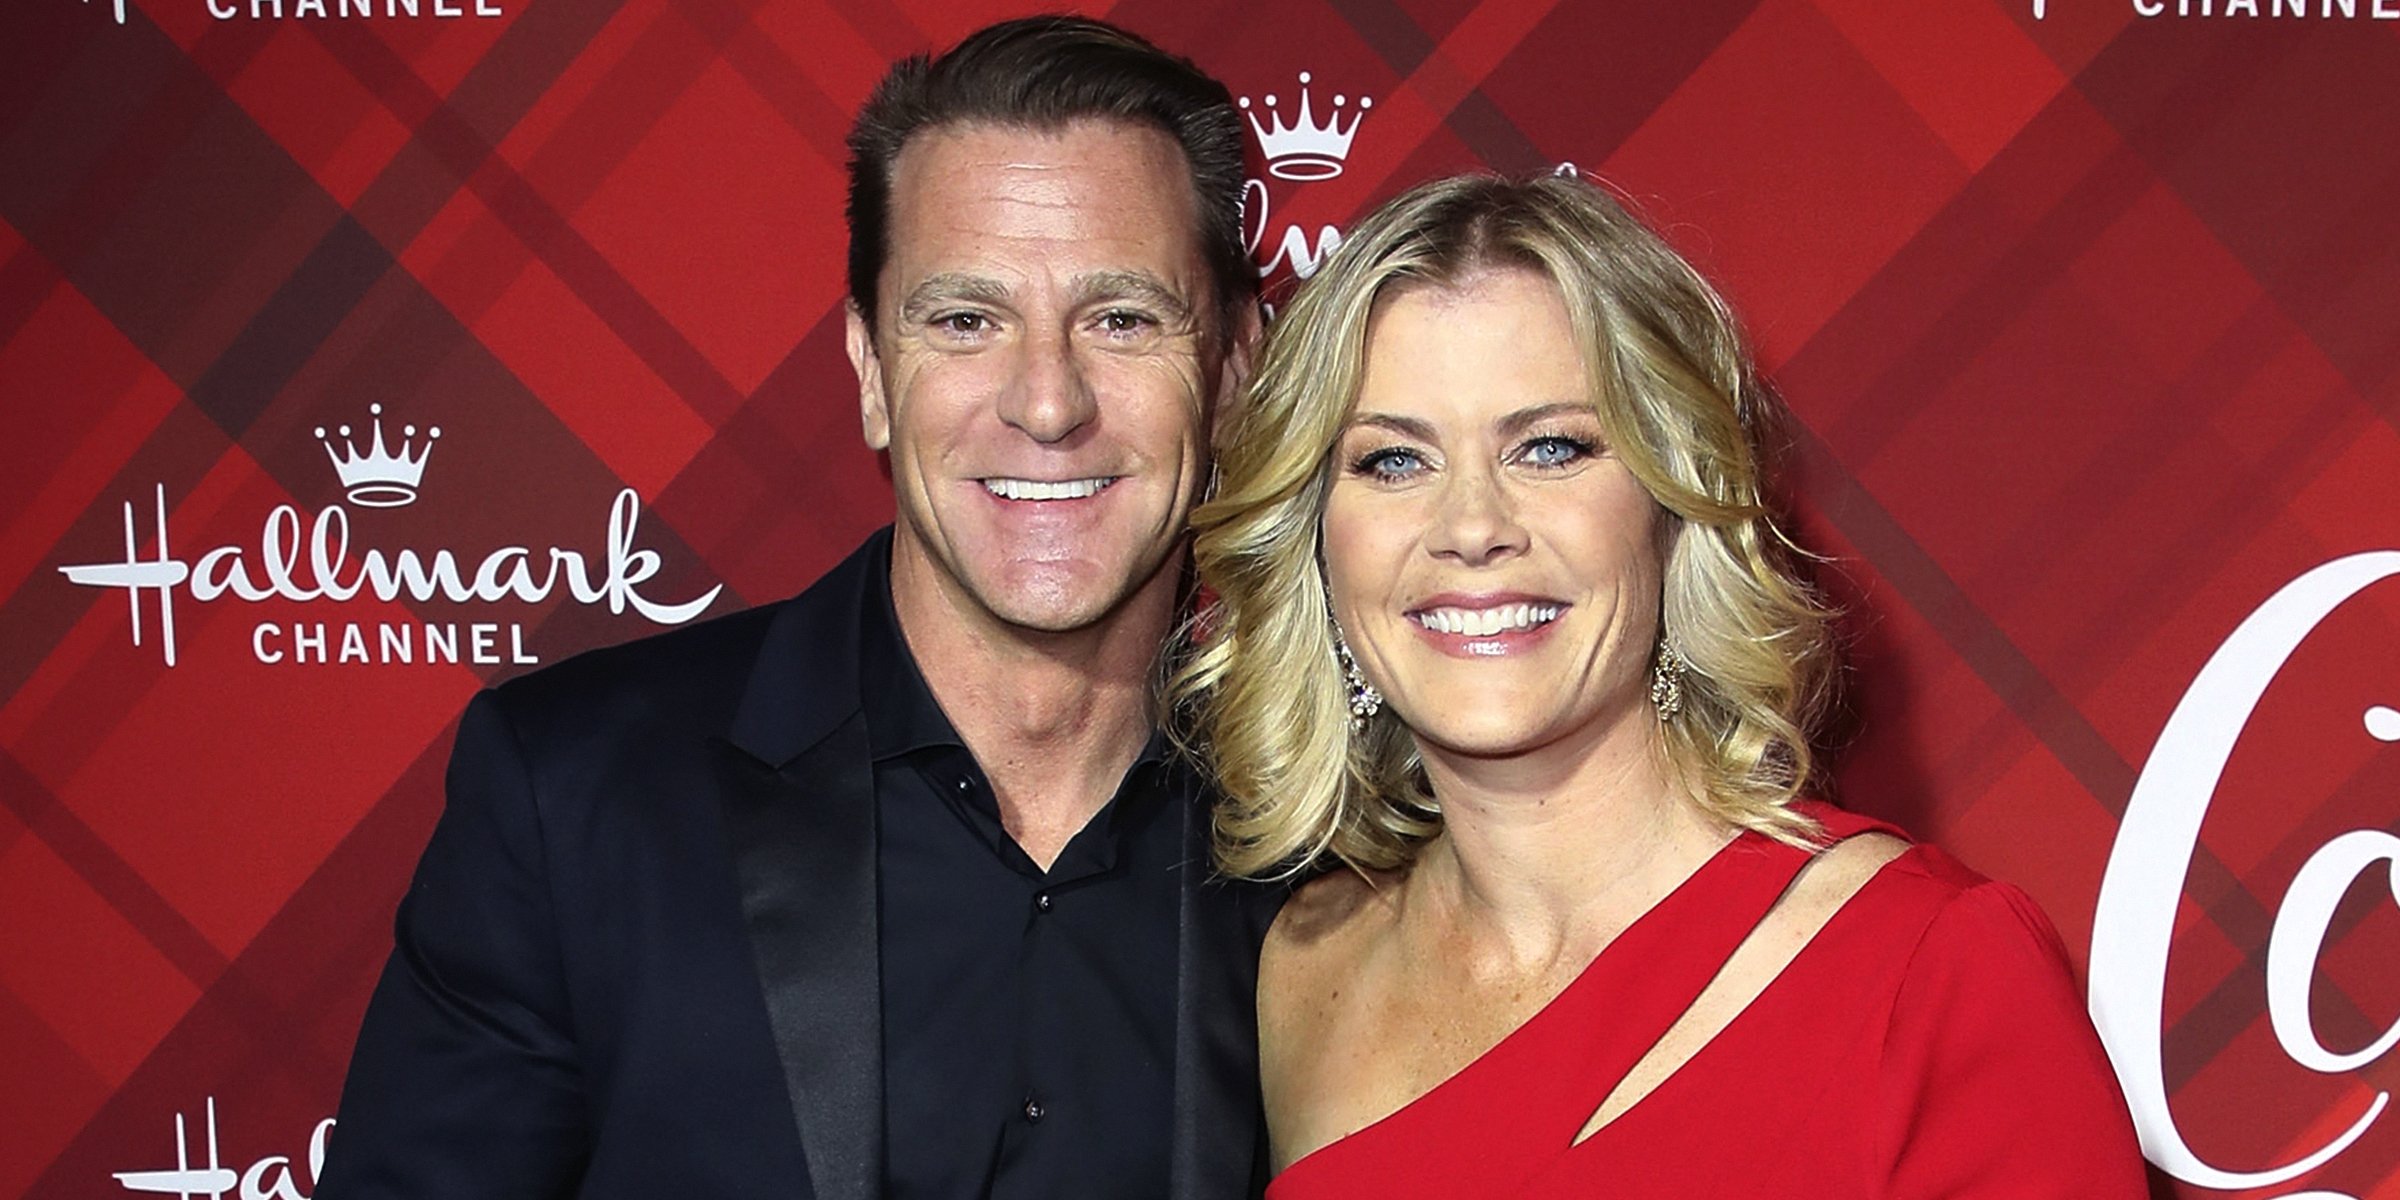 David Sanov and Alison Sweeney | Source: Getty Images